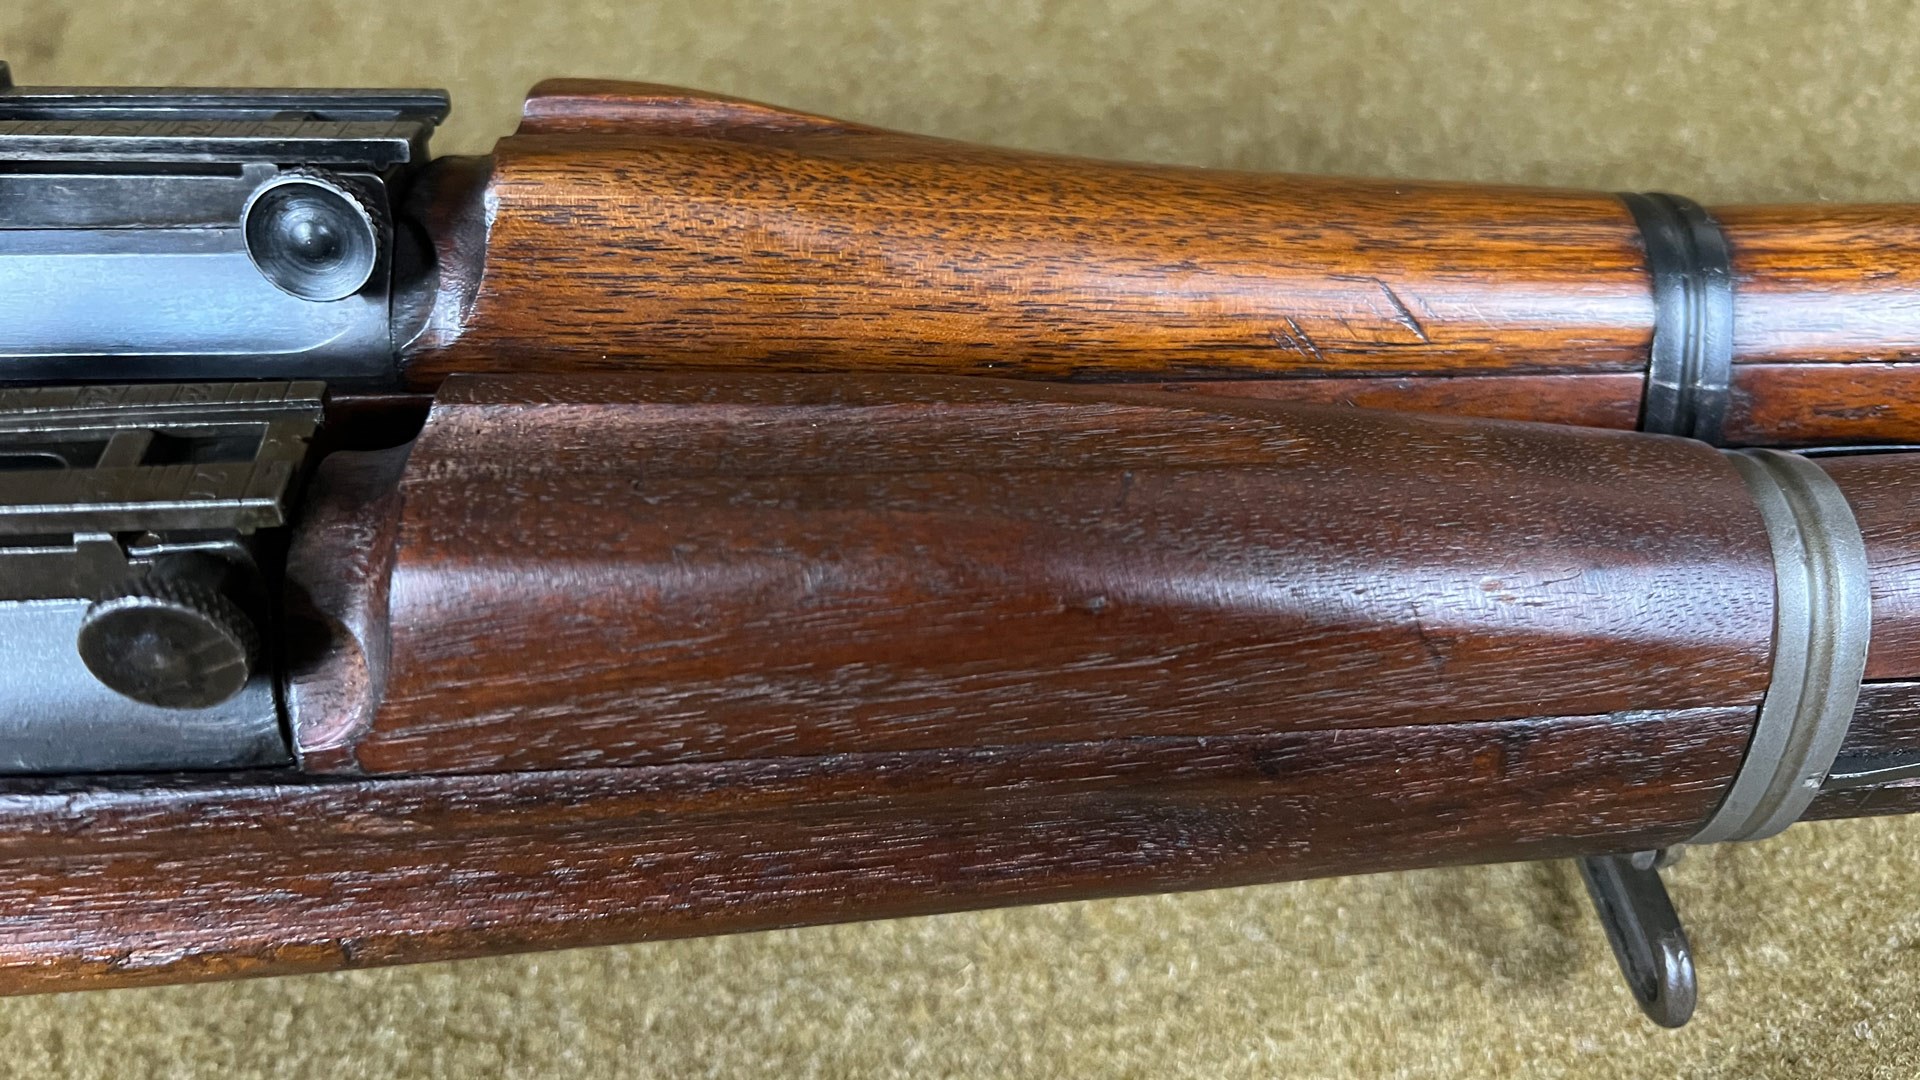 Comparison of two wood features on bolt-action military rifles